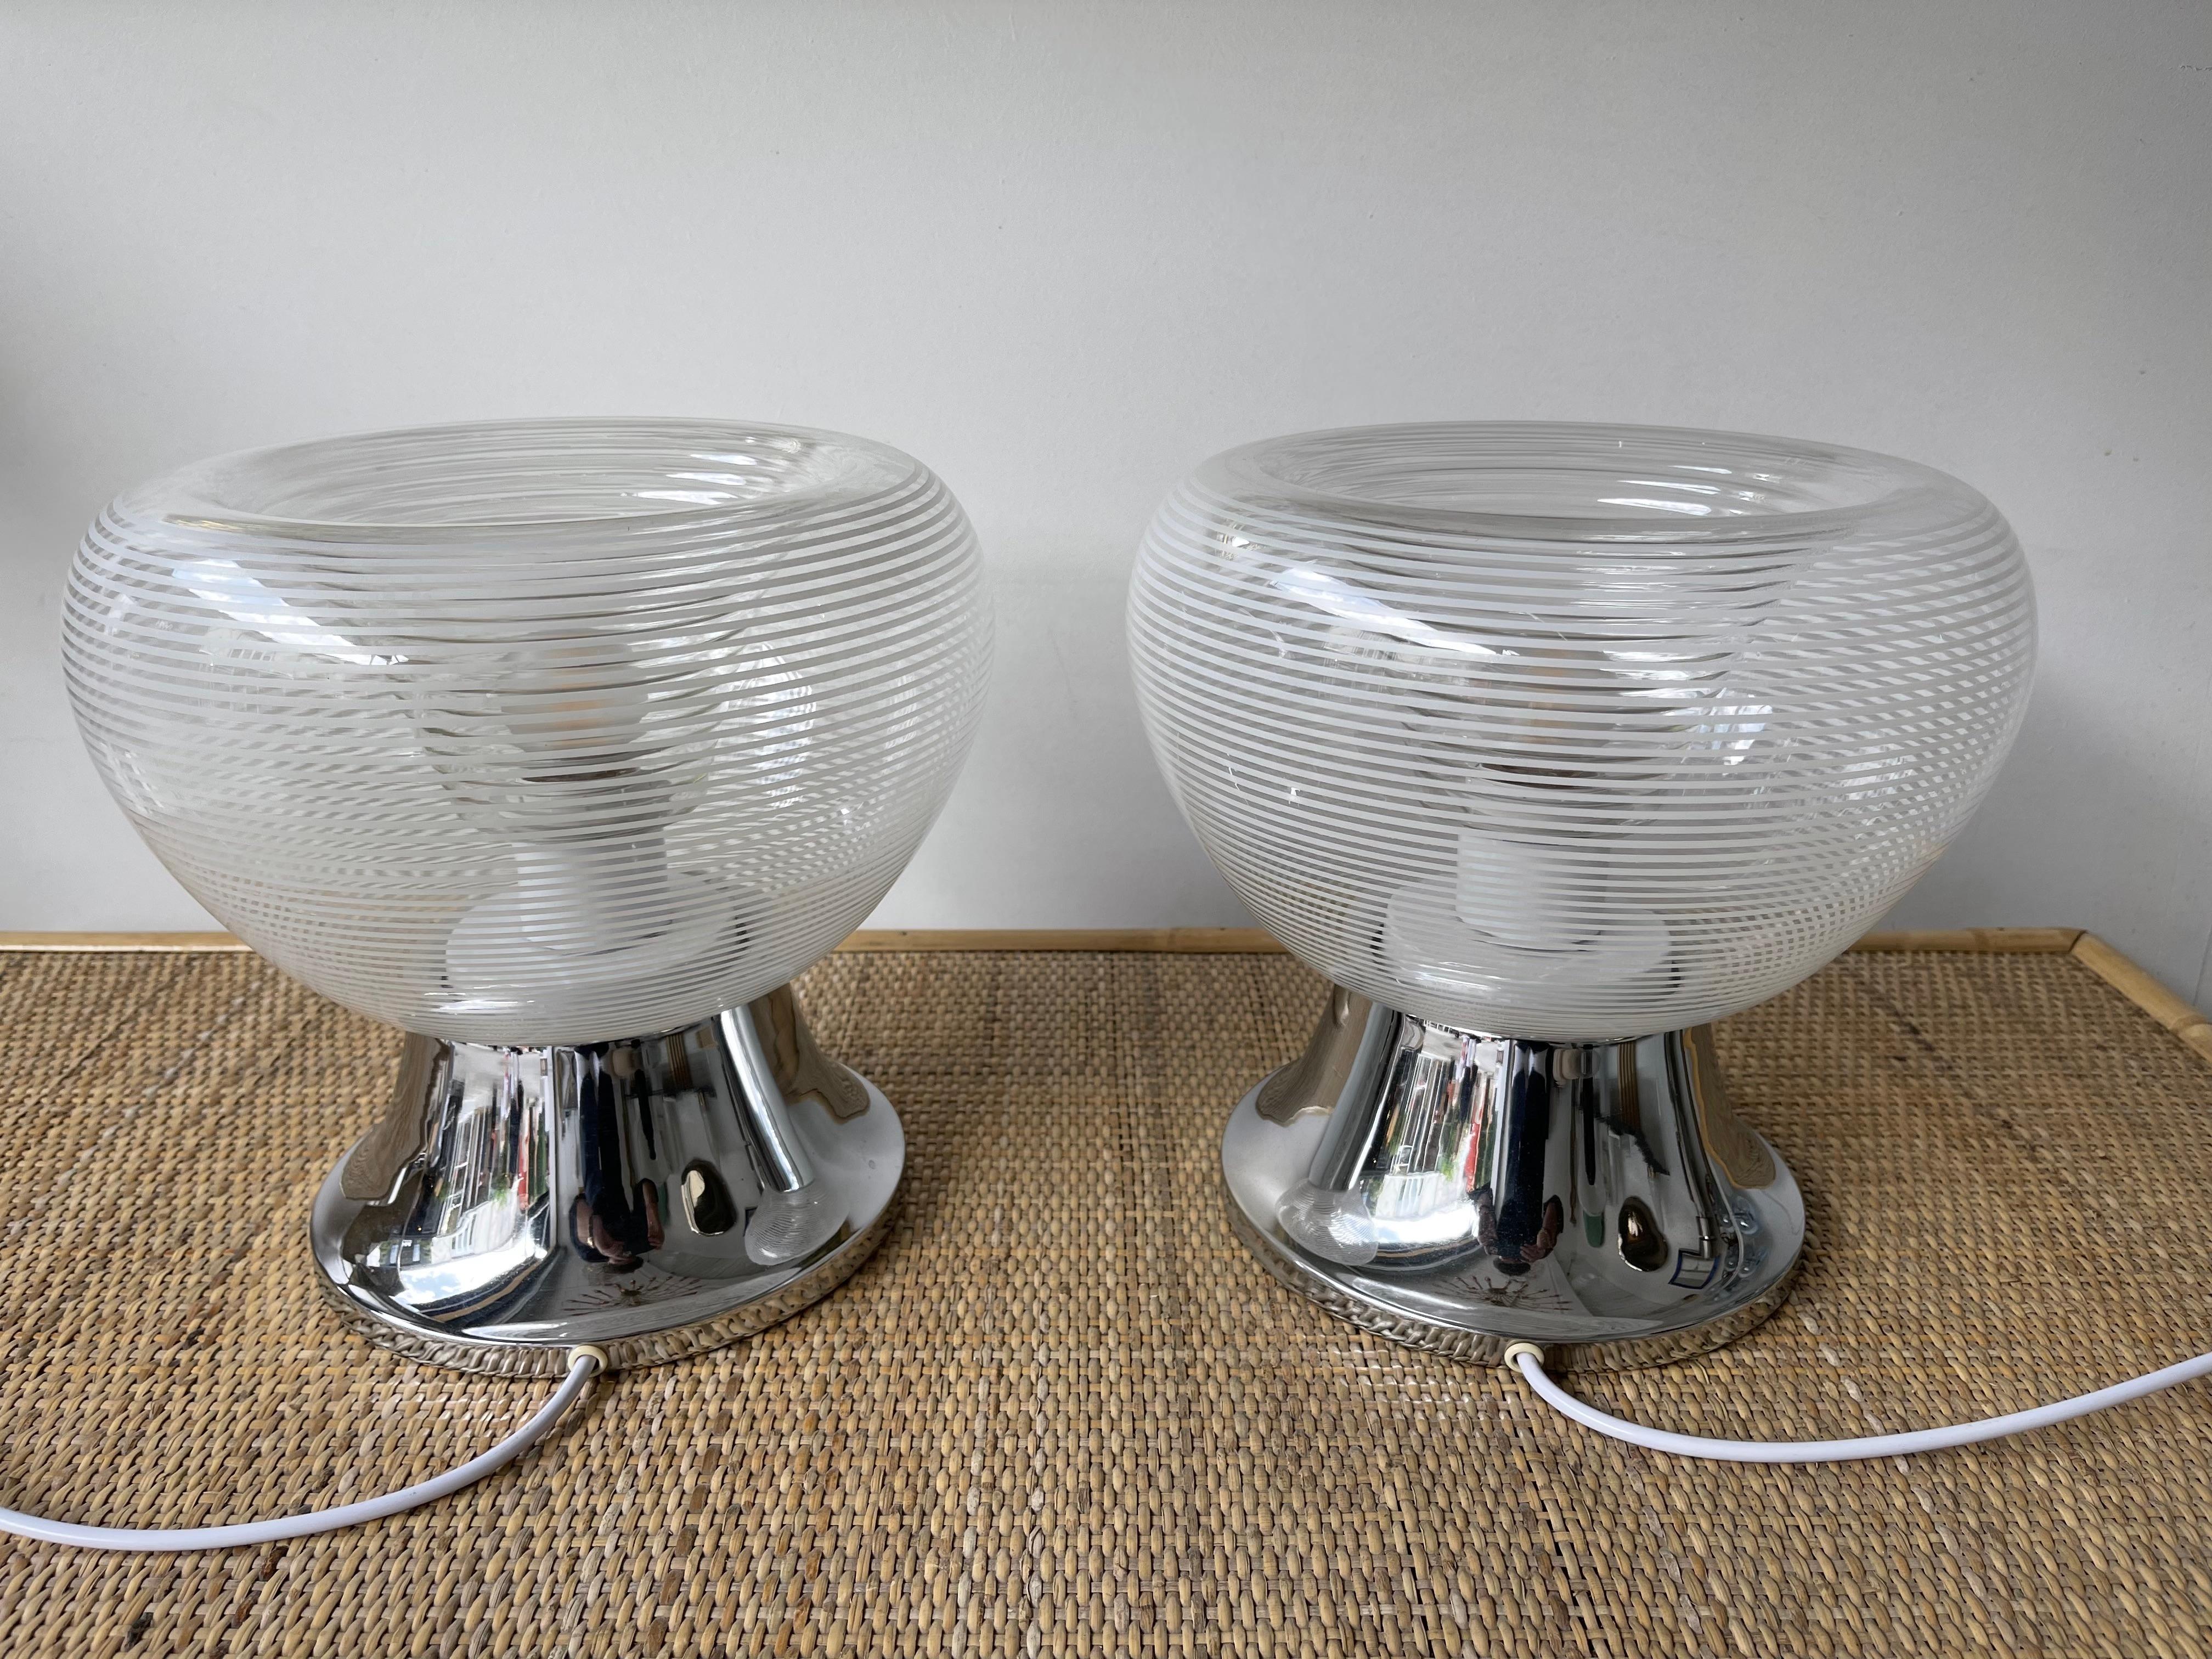 Pair of Stripe Murano Glass and Metal Chrome Lamps by VeArt, Italy, 1970s For Sale 7